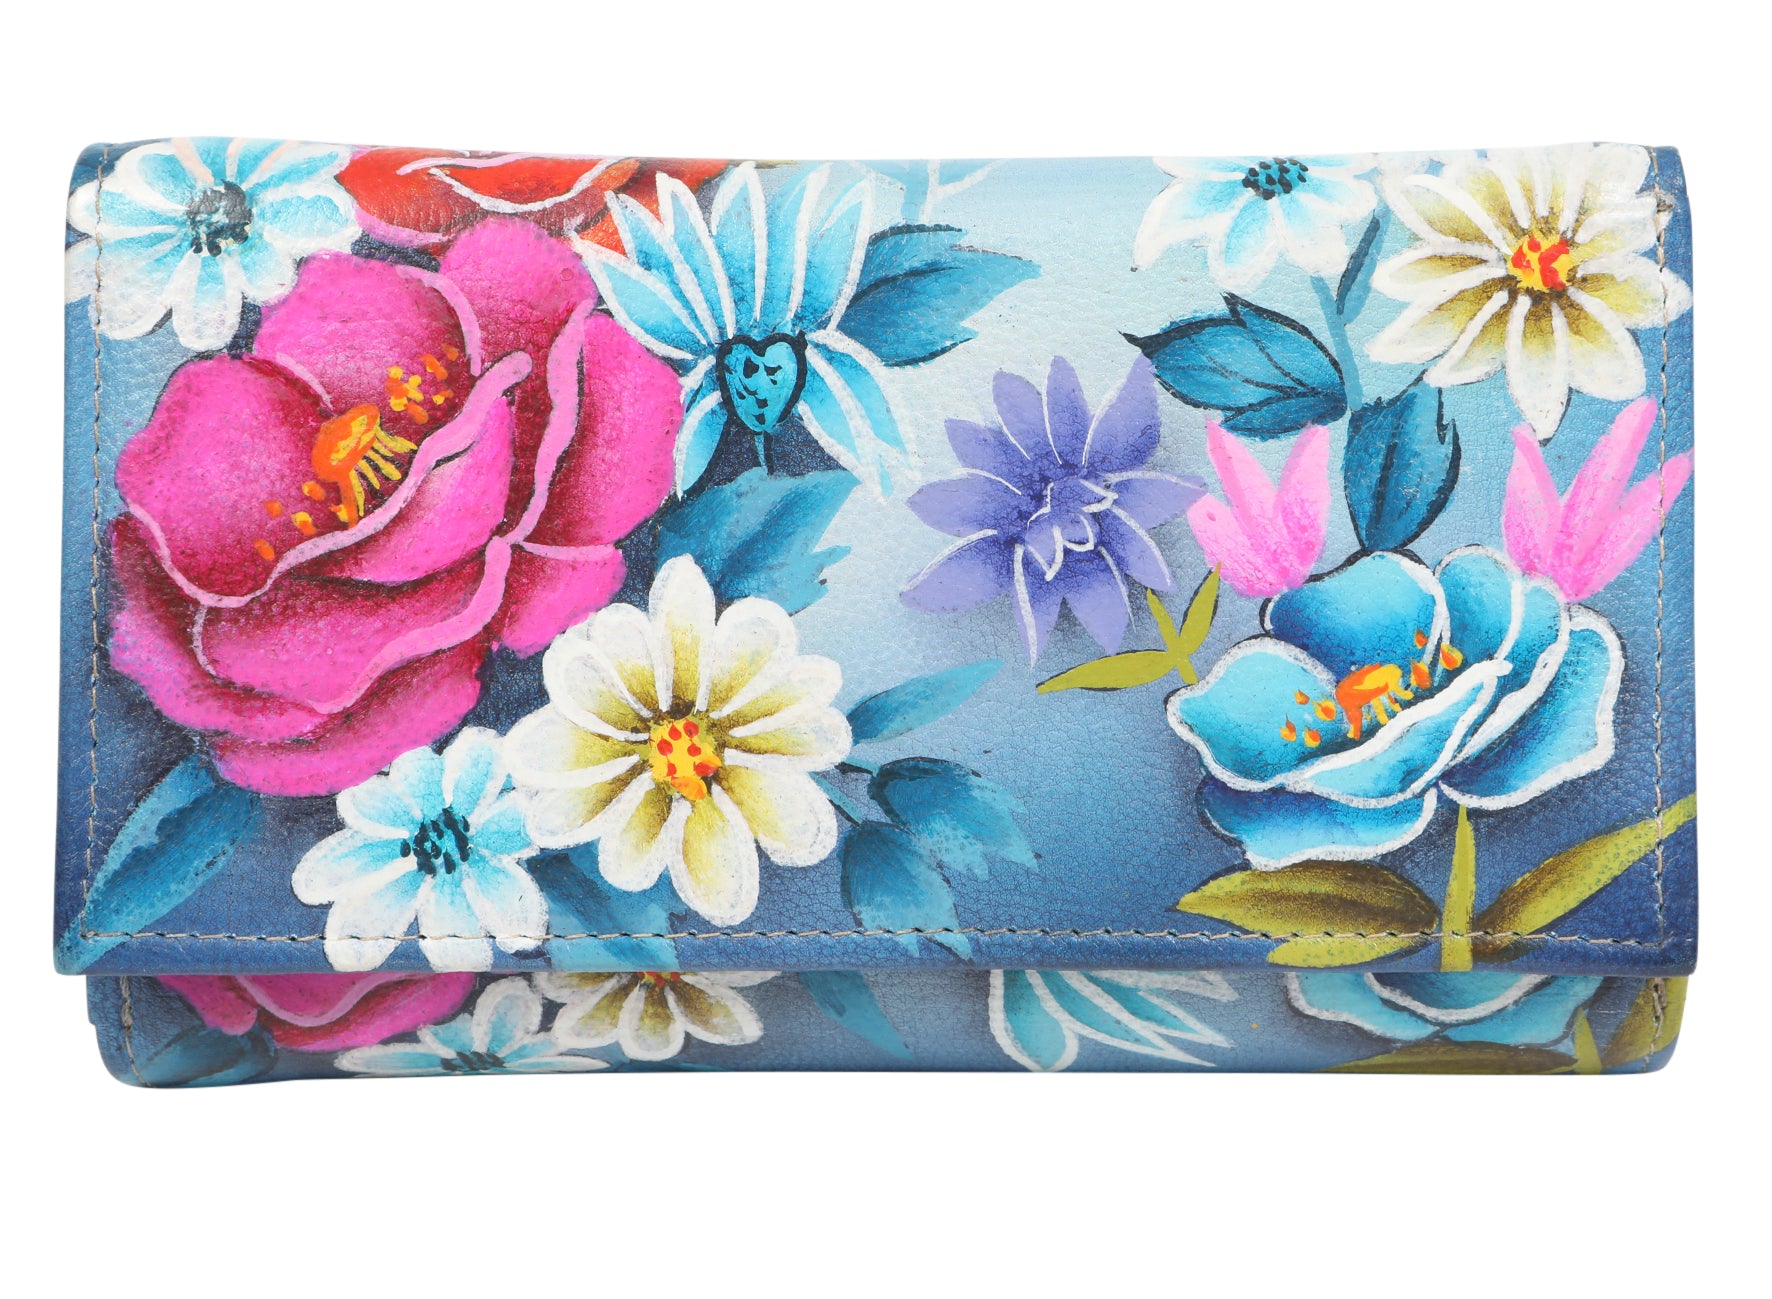 Modapelle Hand Painted Women's Leather Wallet